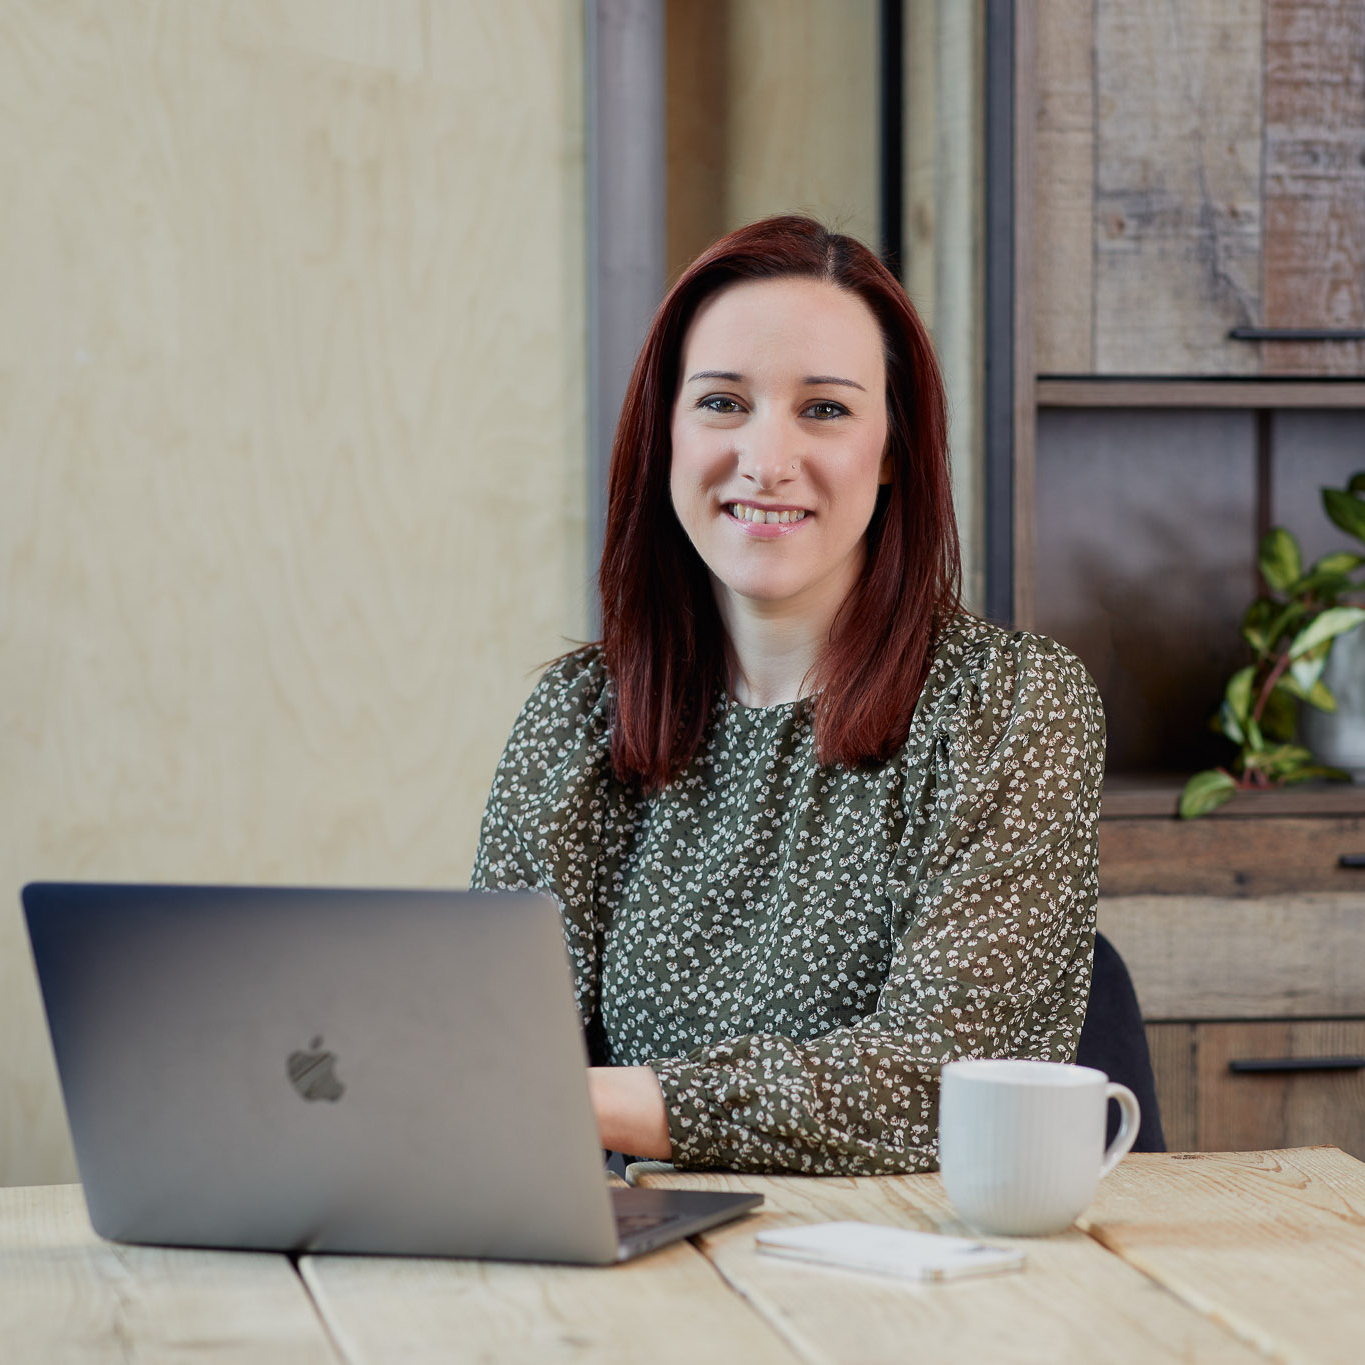 Woman in green top, with a laptop and mug on a wooden desk